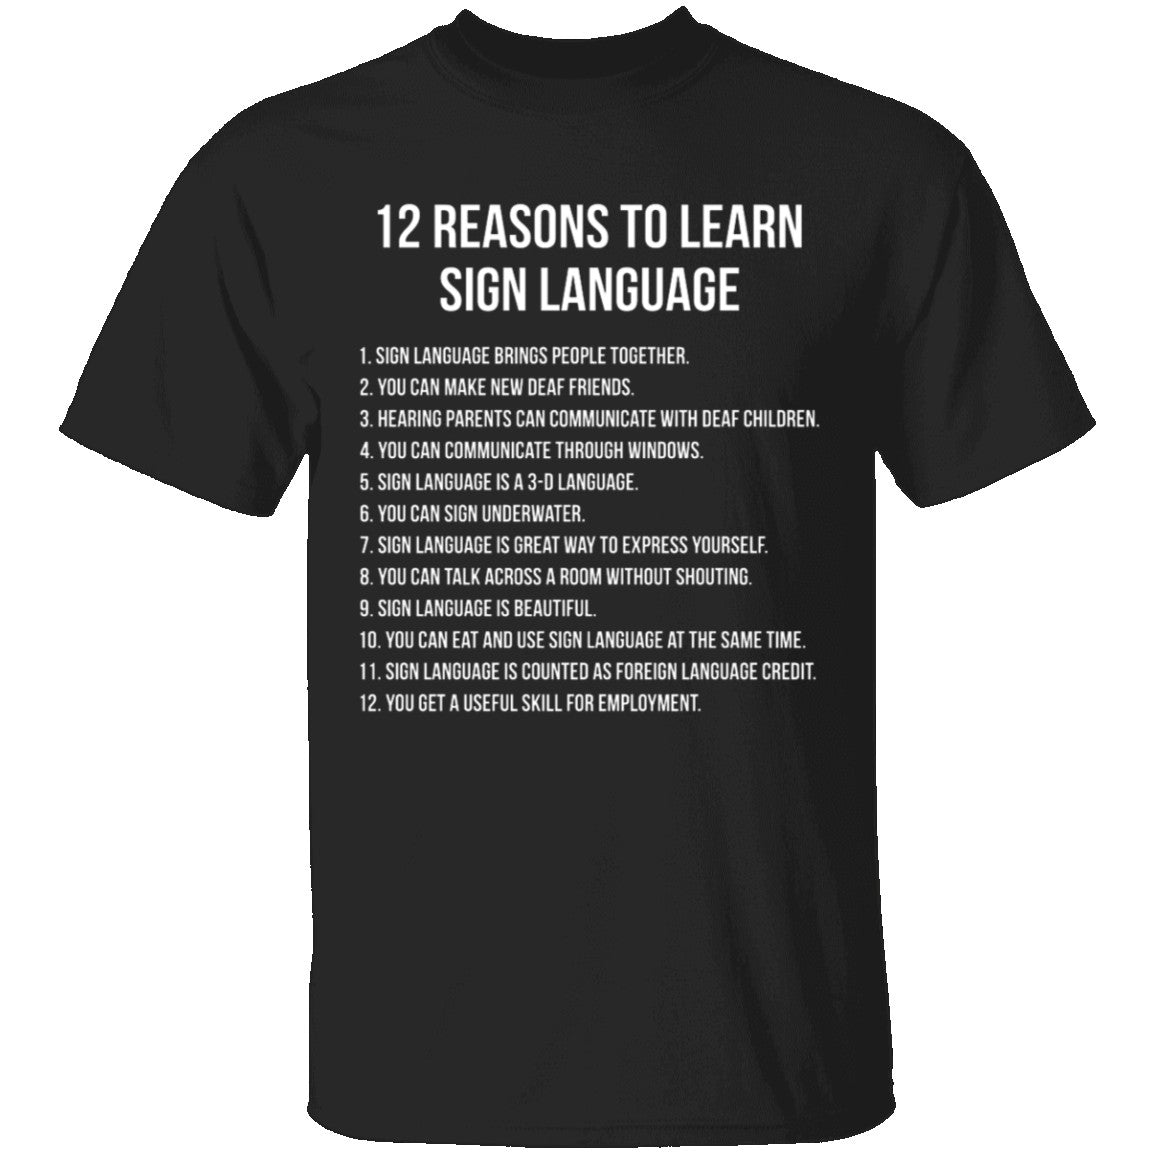 12-reasons-to-learn-sign-language-t-shirt-gnarly-tees